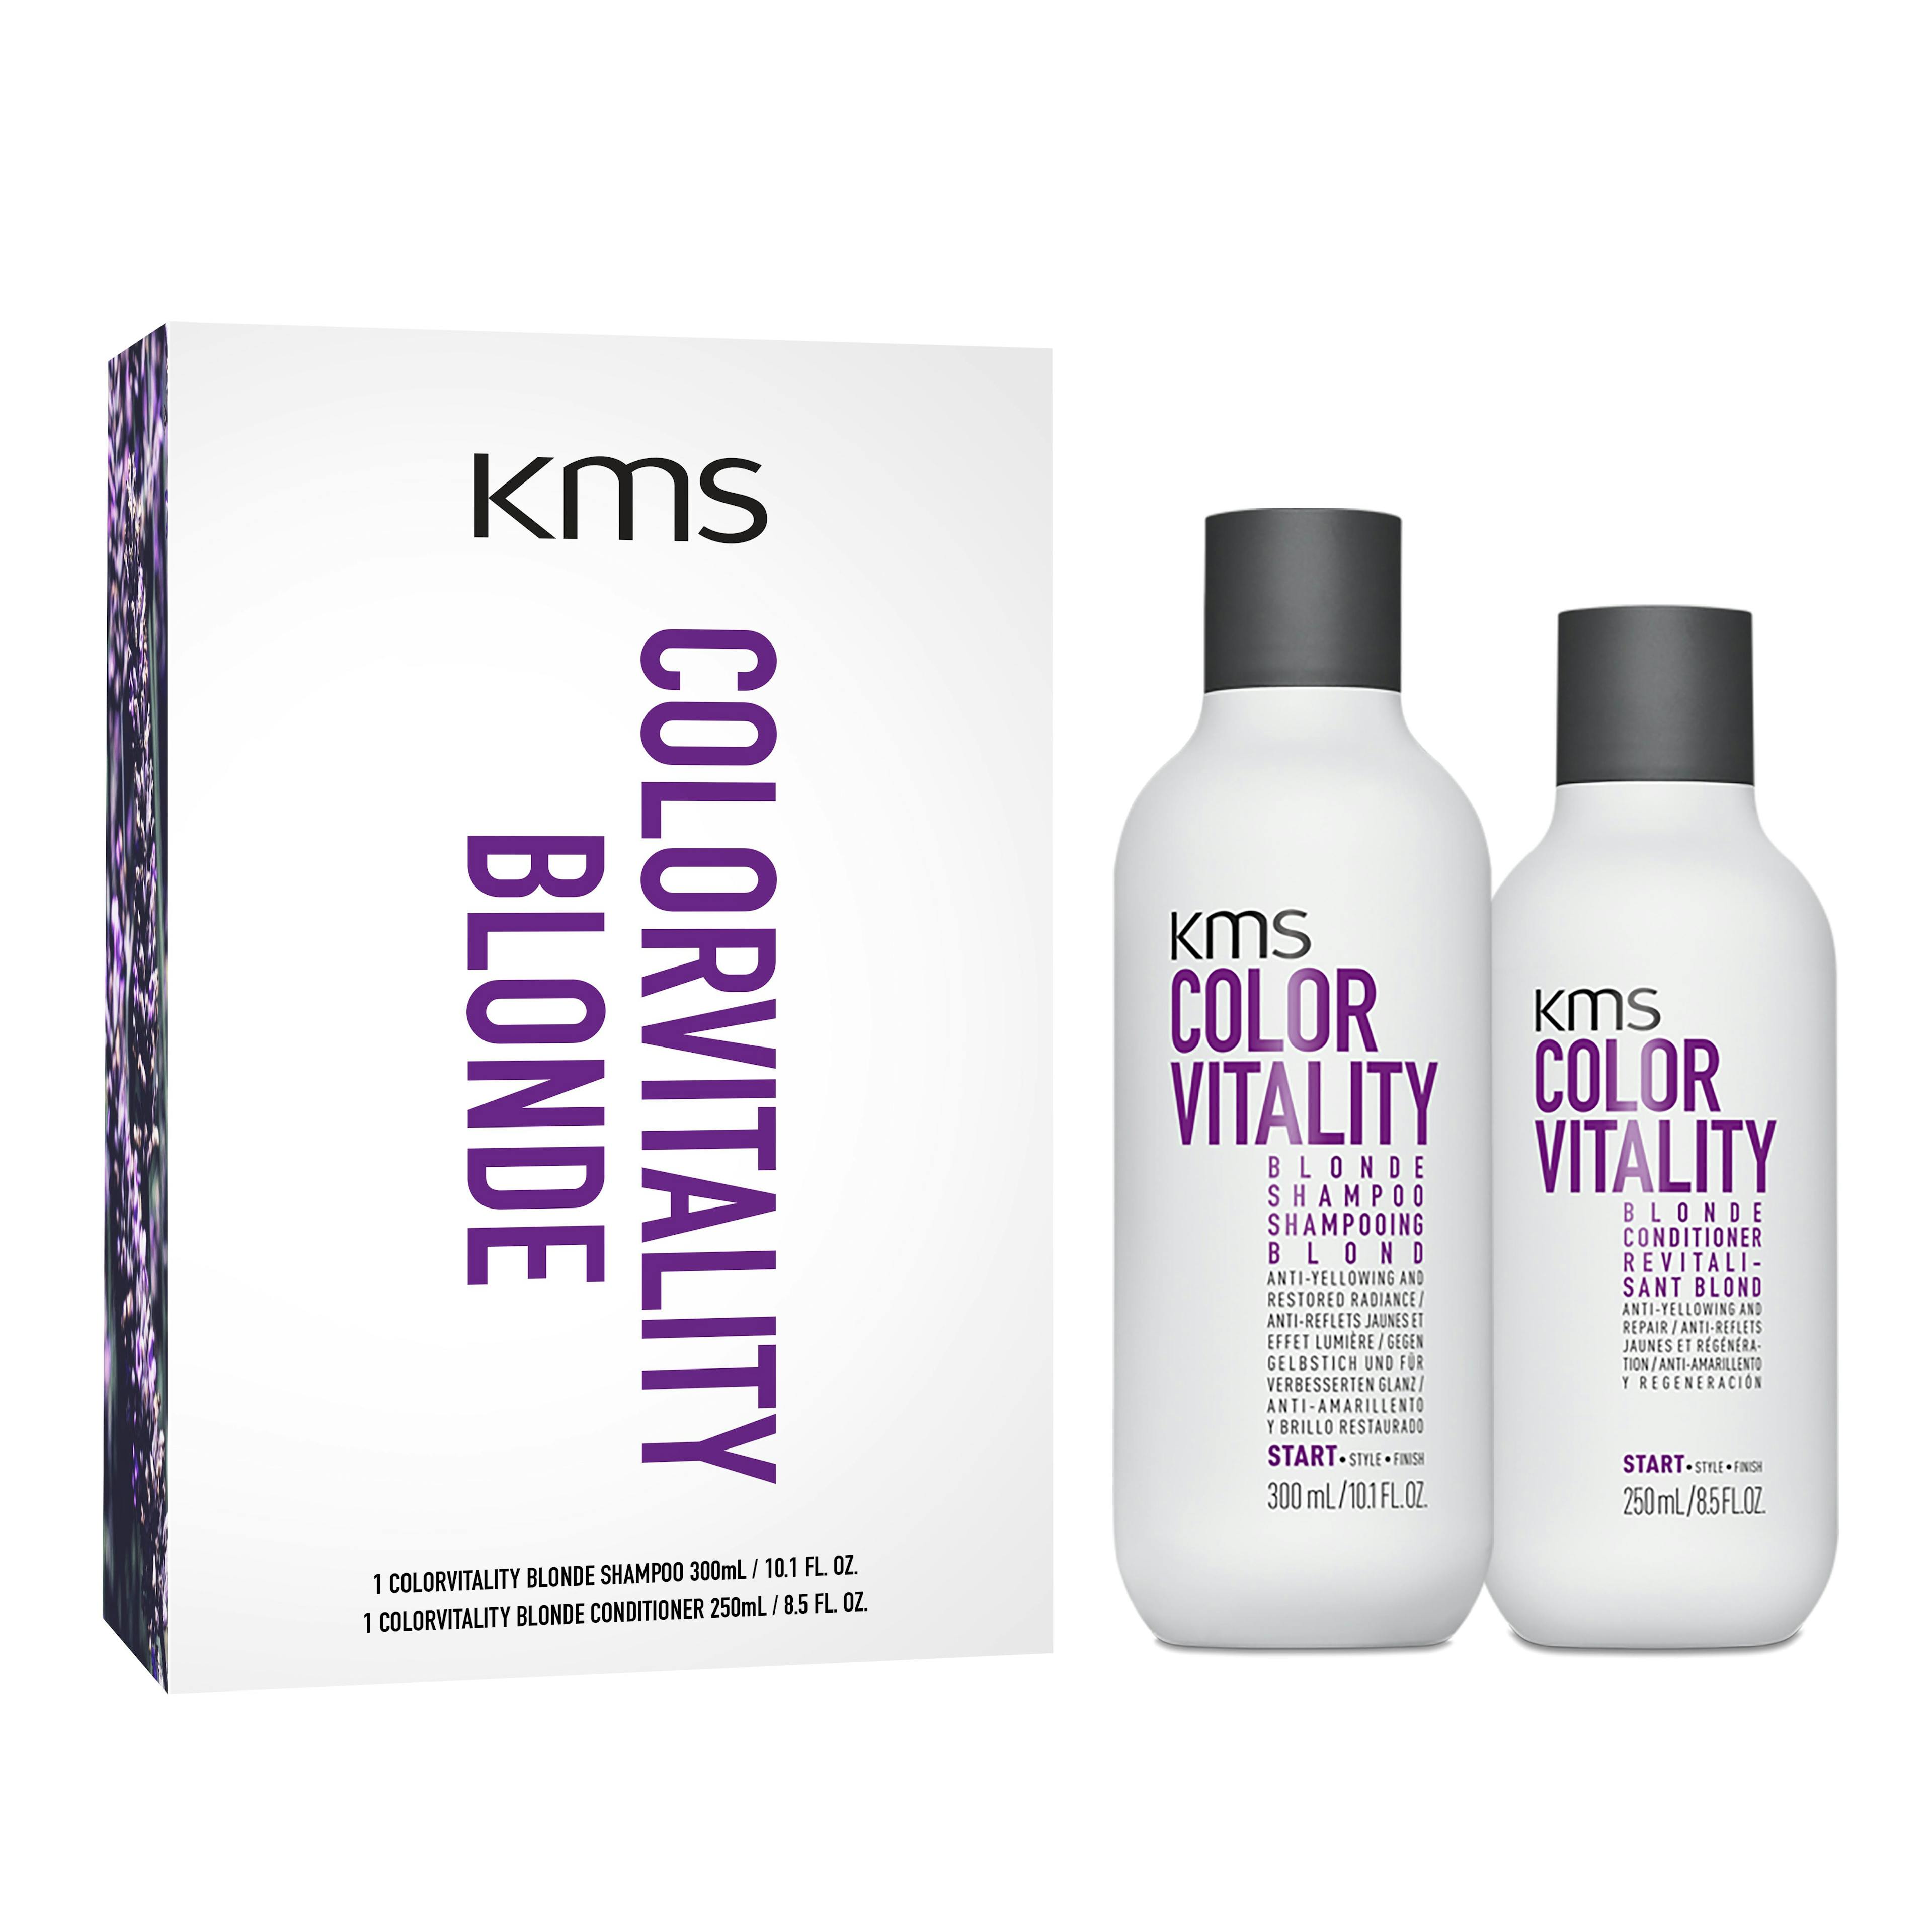 KMS Color Vitality Blonde Duo Pack